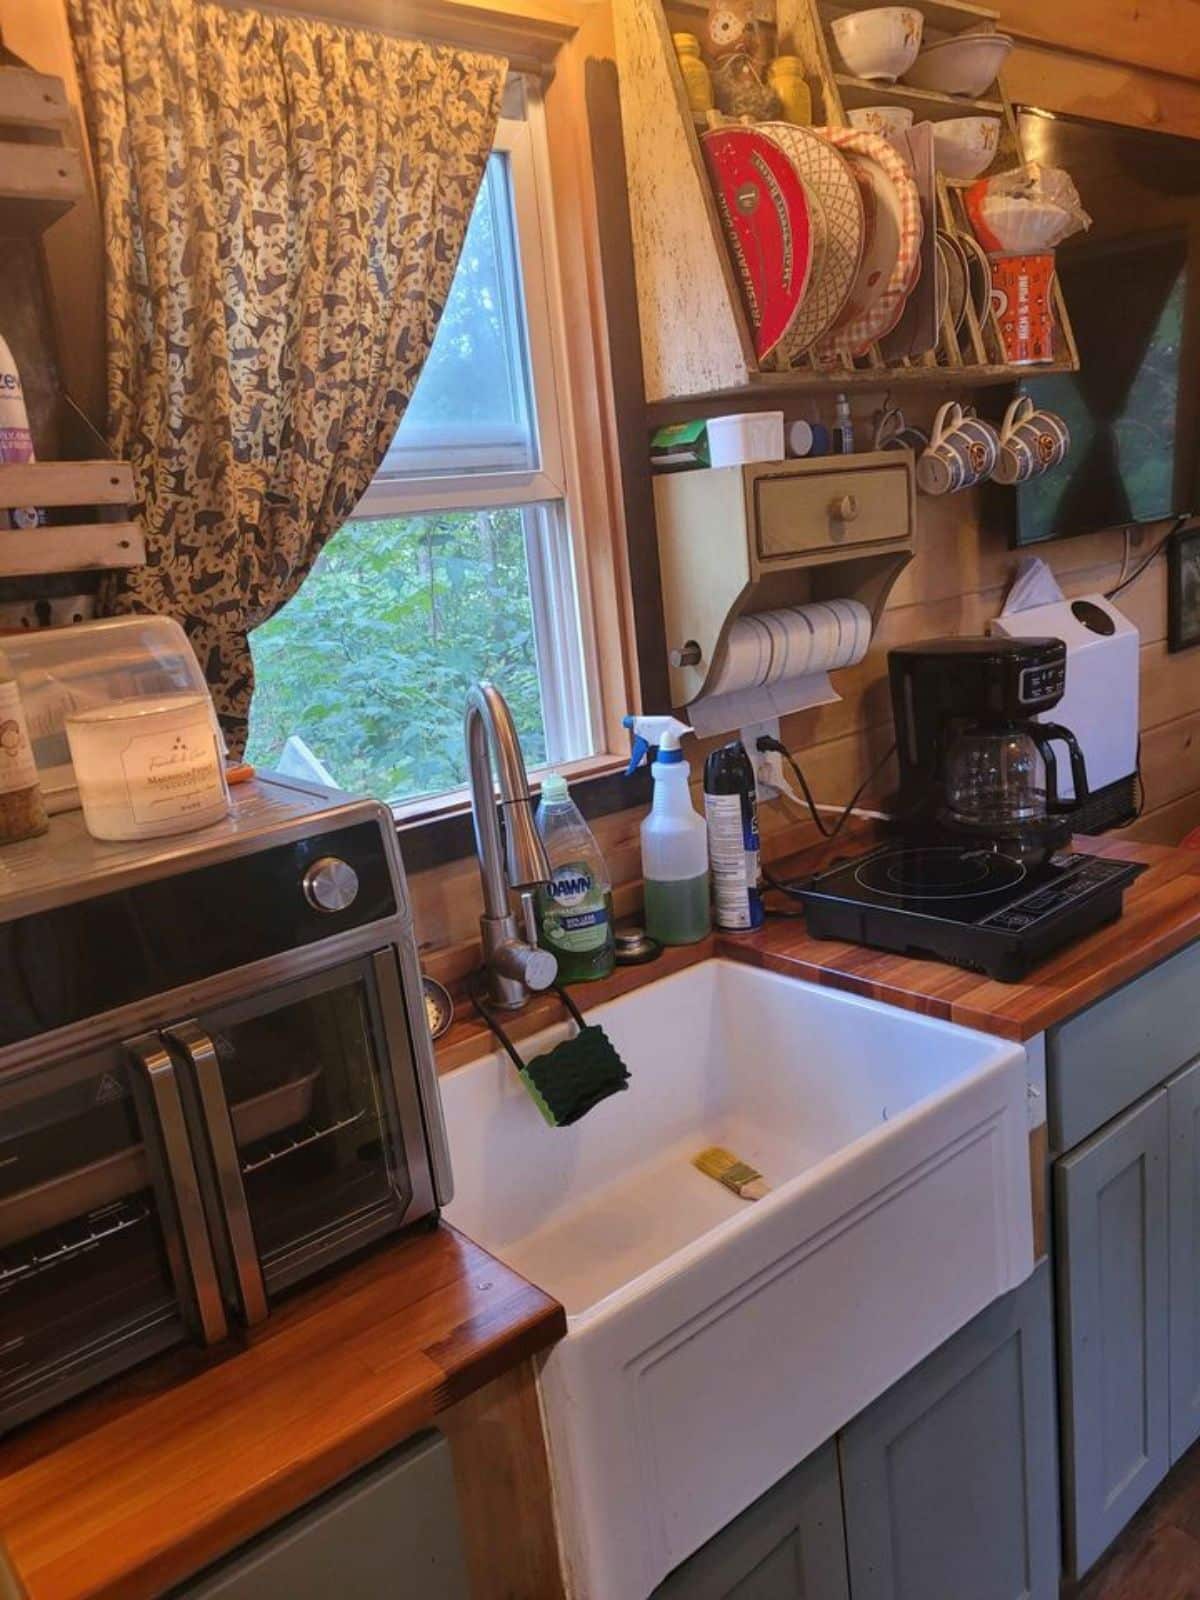 Compact kitchen area of Lovely Tiny Home